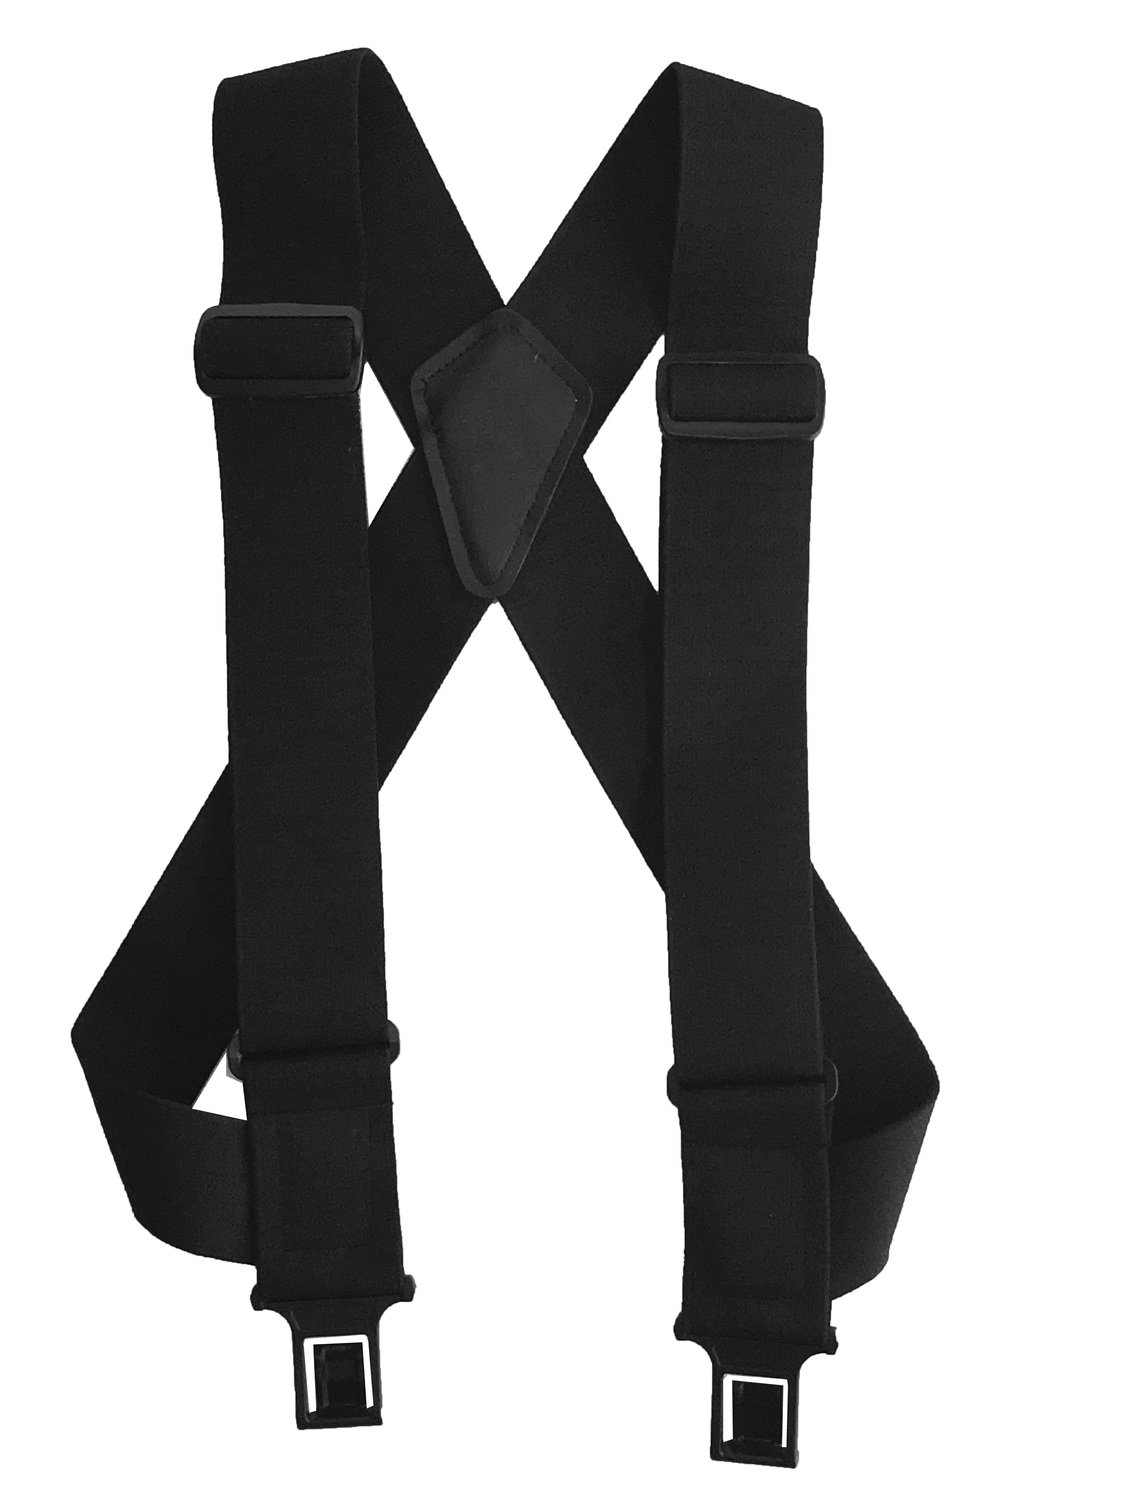 uBEE Perry Suspenders™ - Black
1.5" and 2" widths available